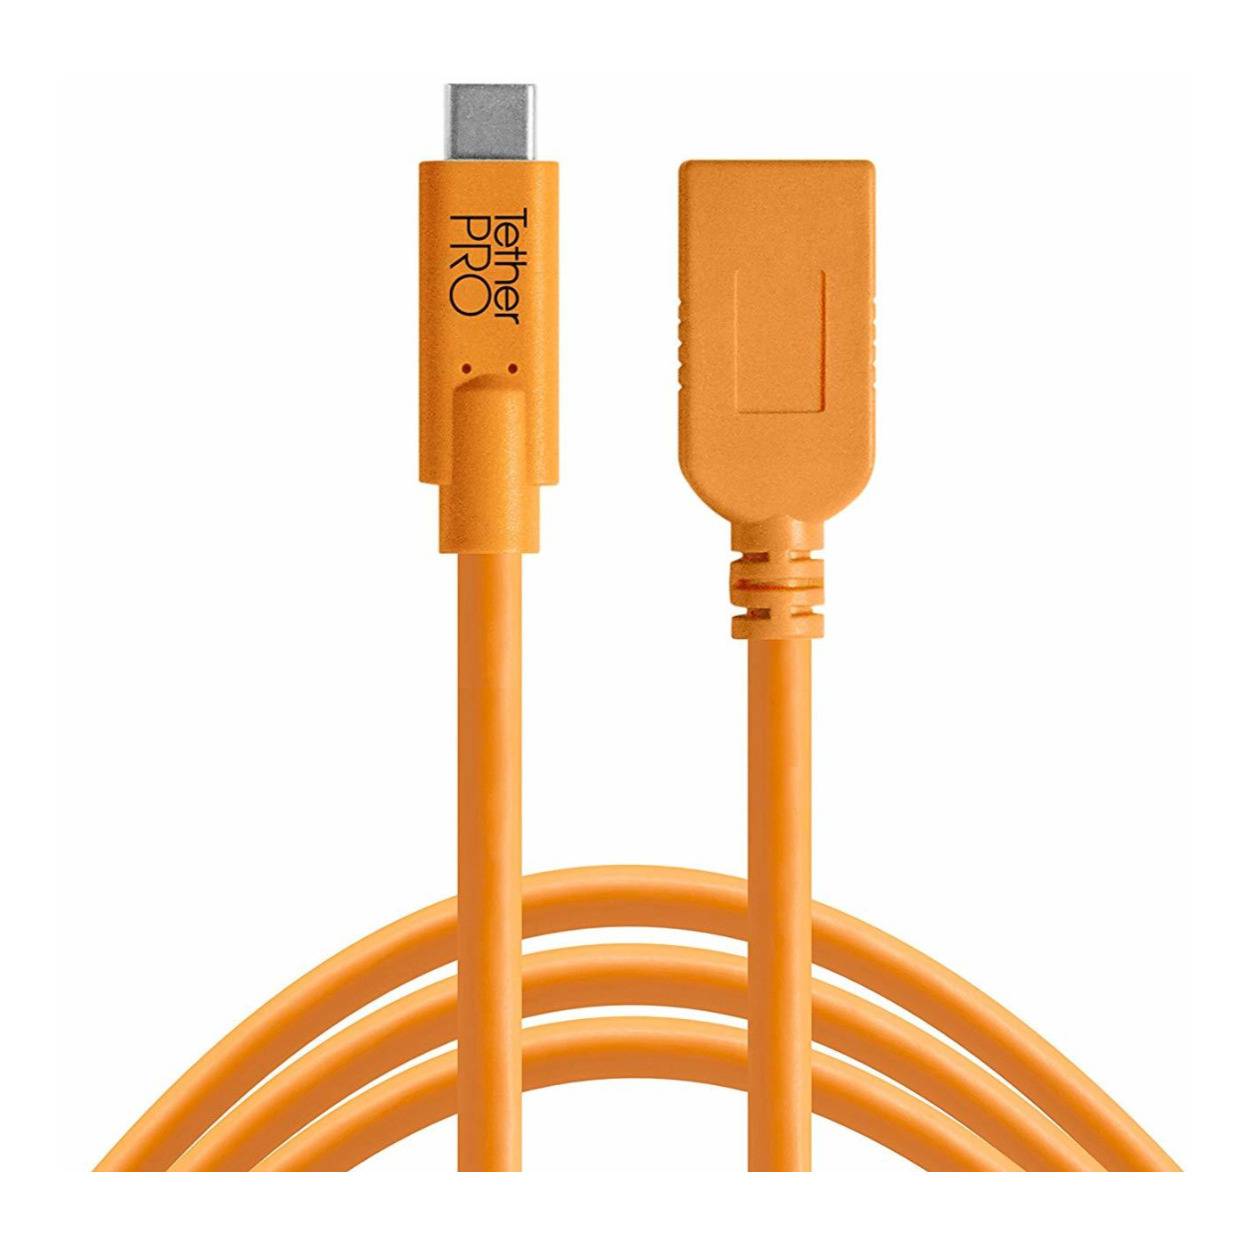 Tether Tools TetherPro USB Type-C to USB Type-A Extension Cable (15-Feet, Orange)